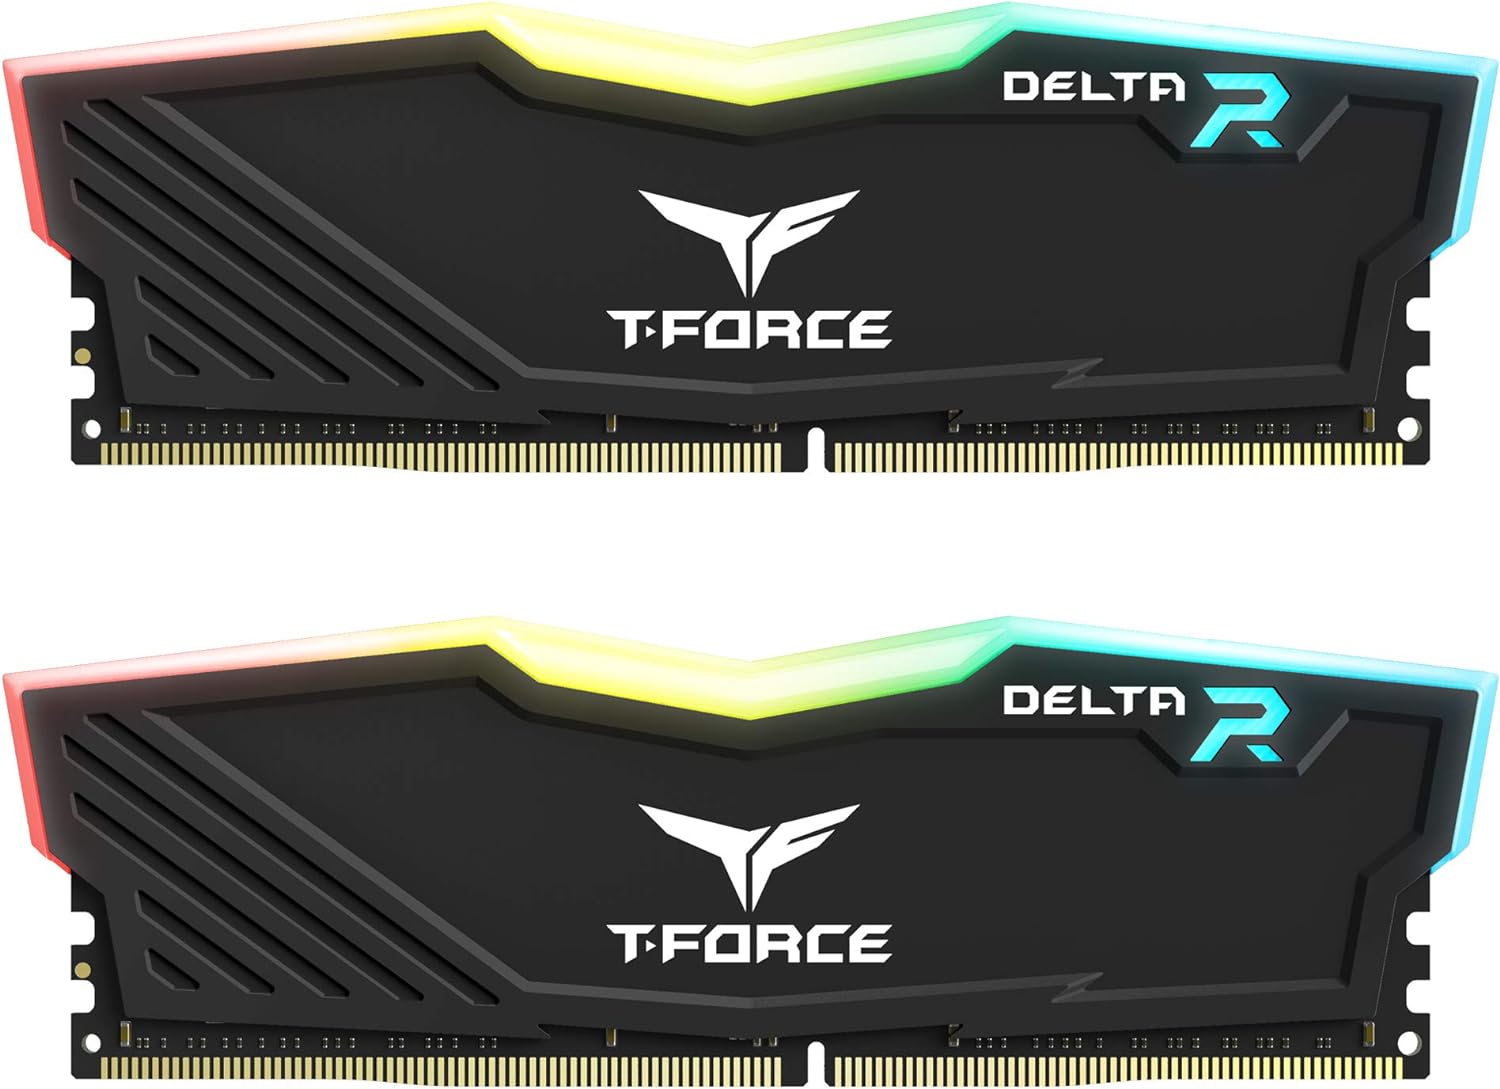 TEAMGROUP T-Force Delta RGB DDR4 64GB RAM - Full frame 120° ultra wide angle lighting, Force Flow RGB effect. 0765441651401